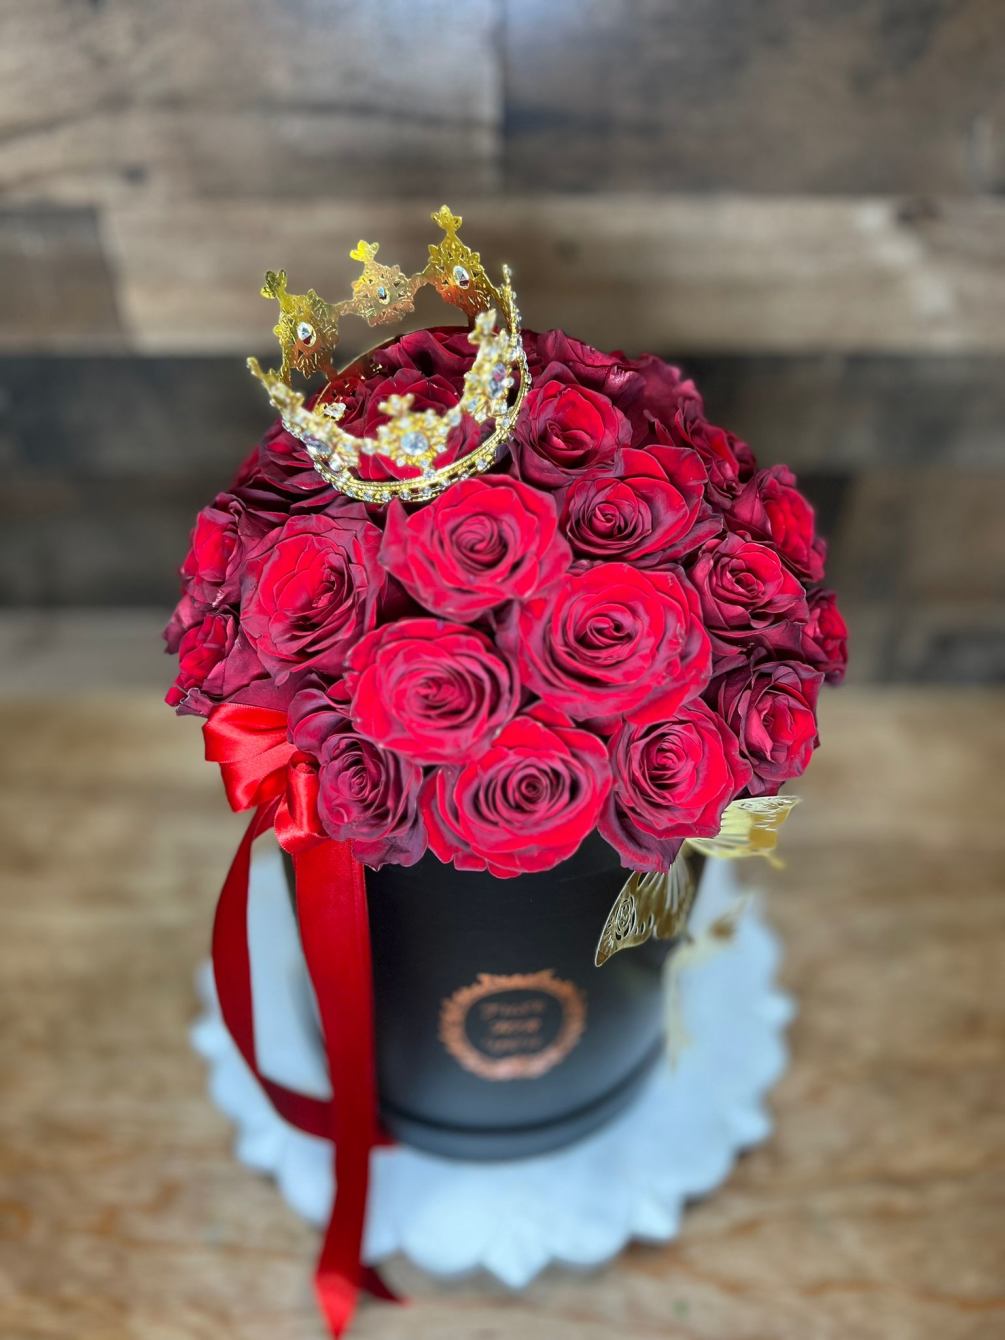 Red roses in a cylinder vase create a classic and elegant floral